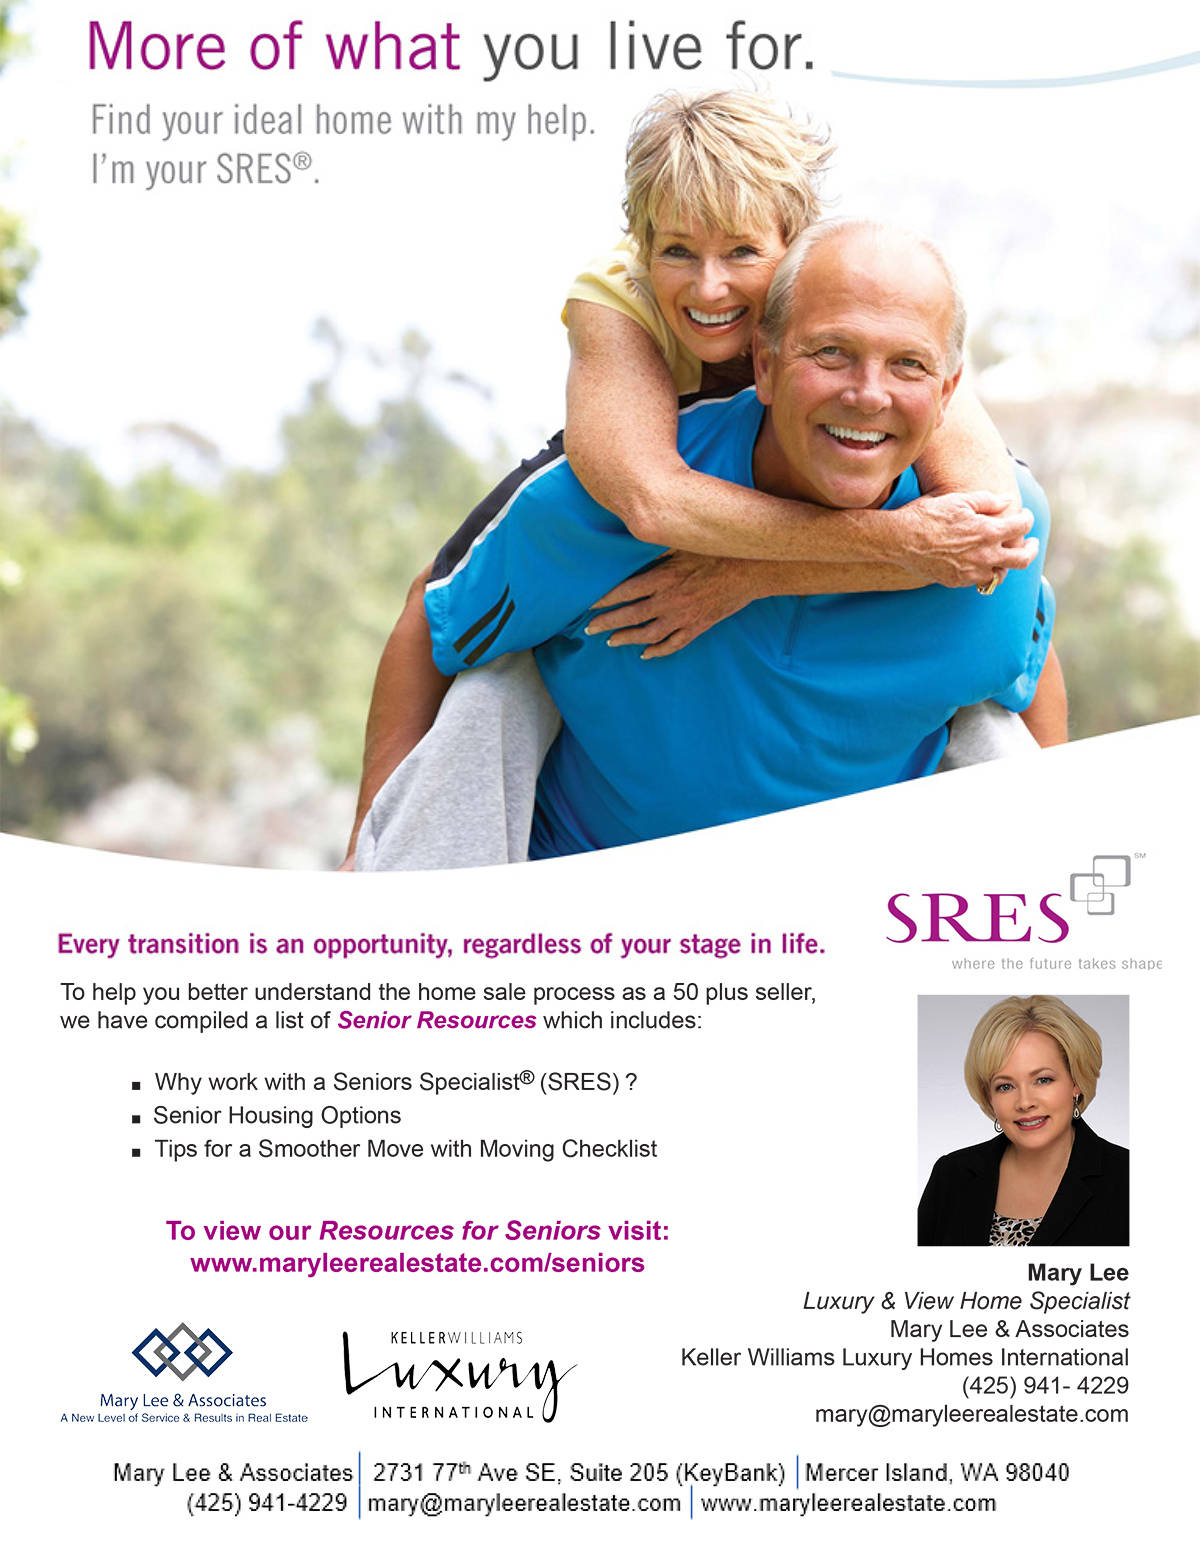 Over 50? Expert Real Estate Specialists are Available to Help!